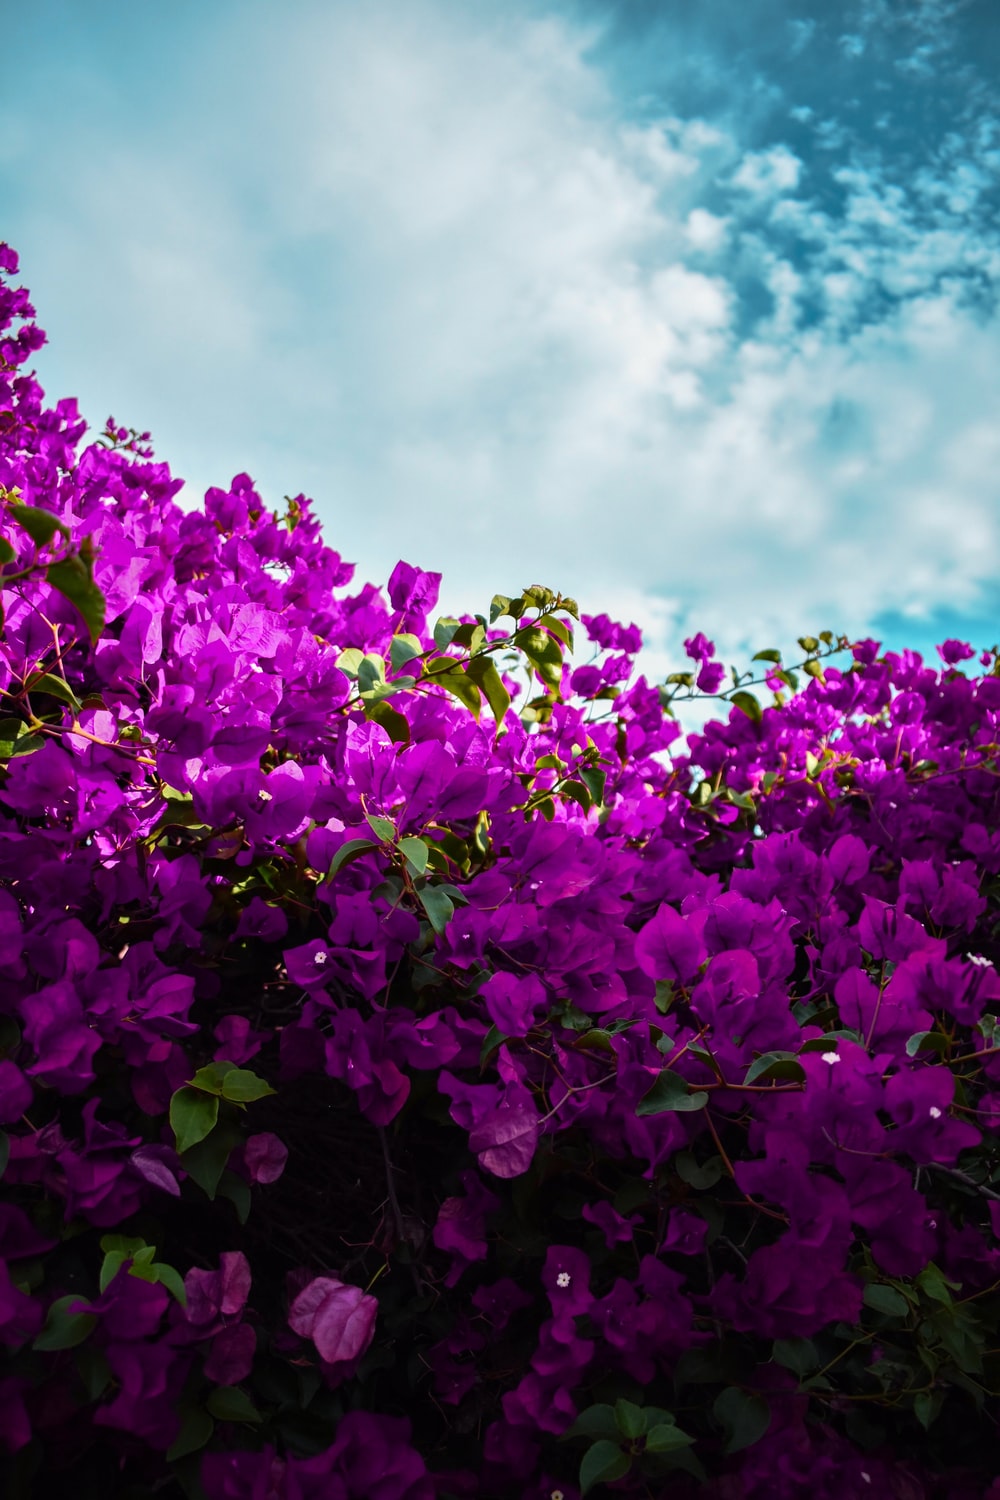 Purple Flower Picture. Download Free Image